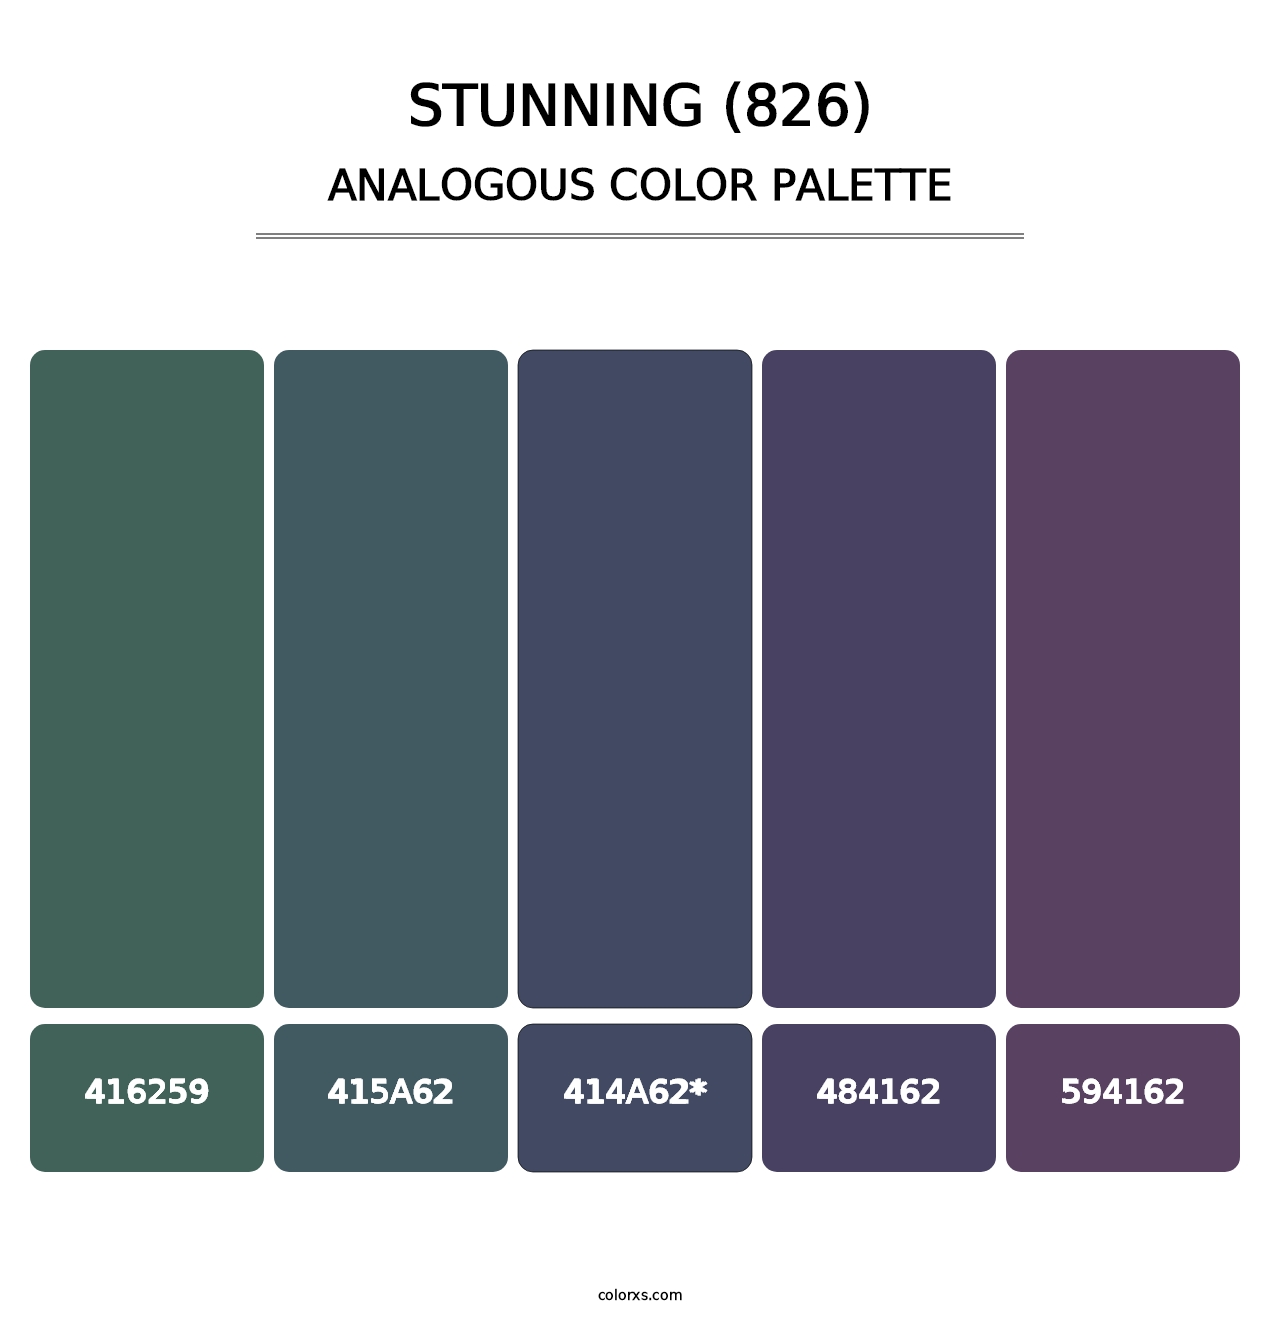 Stunning (826) - Analogous Color Palette